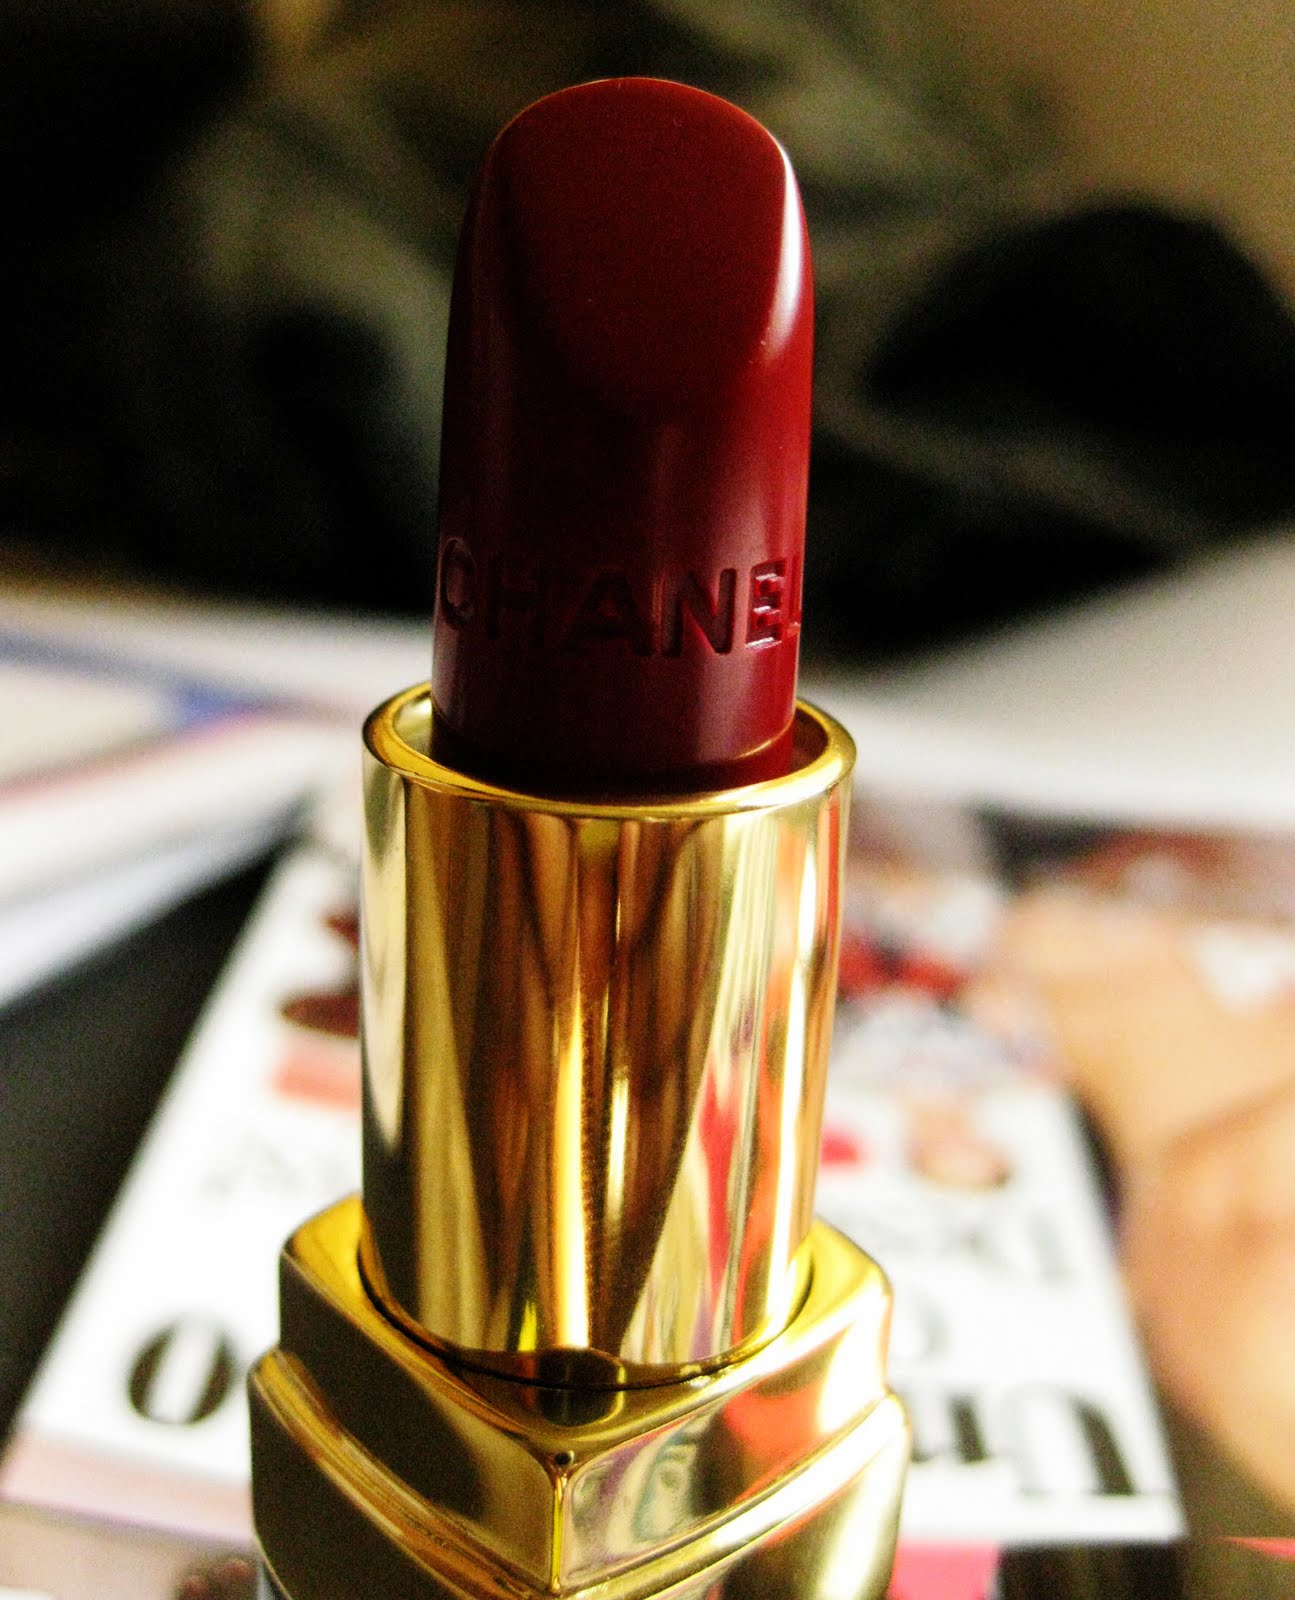 Chanel Rouge Coco Lipstick in Gabrielle - Queen Of All You See